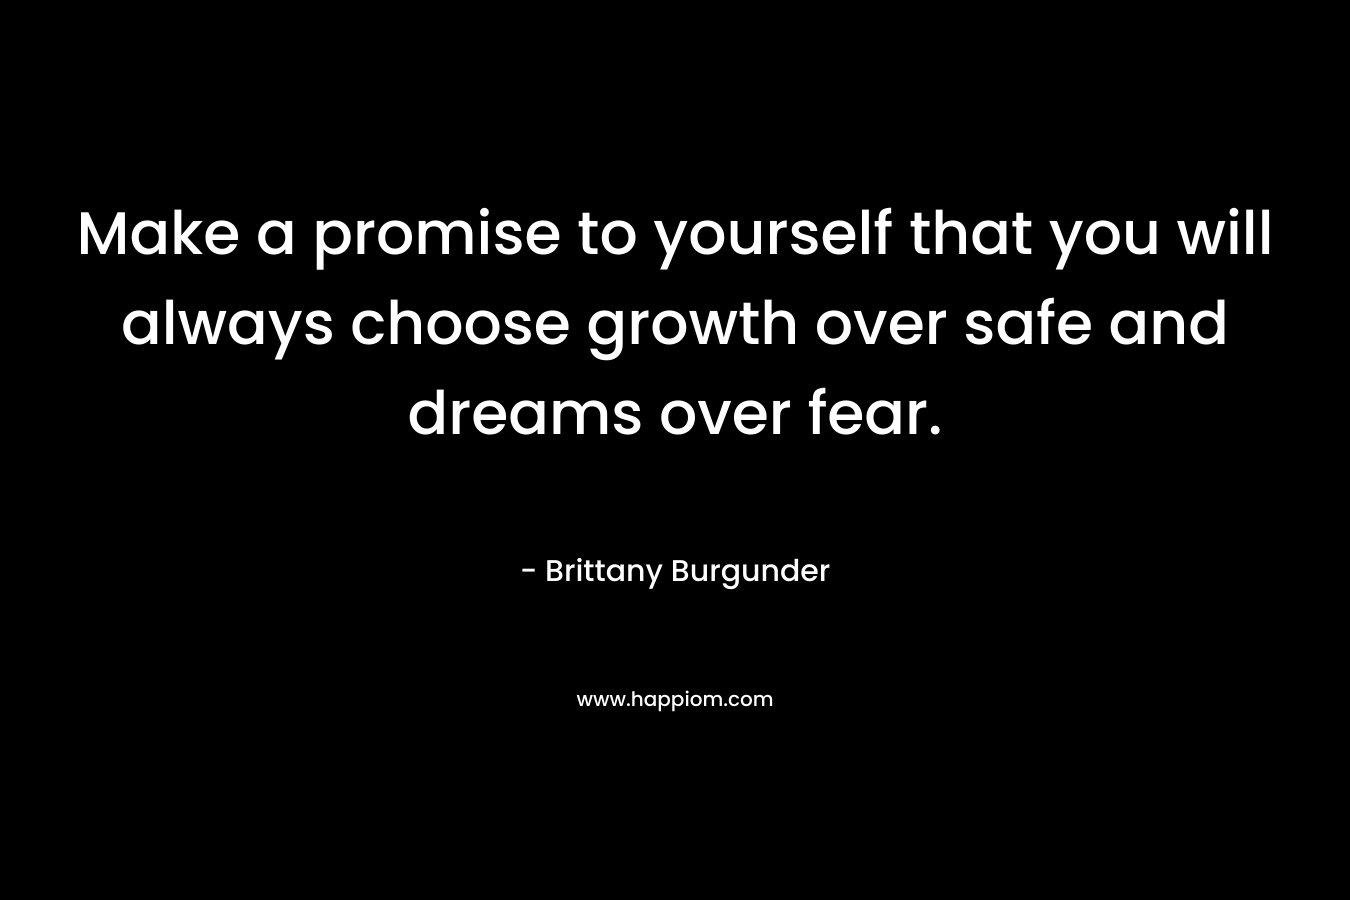 Make a promise to yourself that you will always choose growth over safe and dreams over fear.